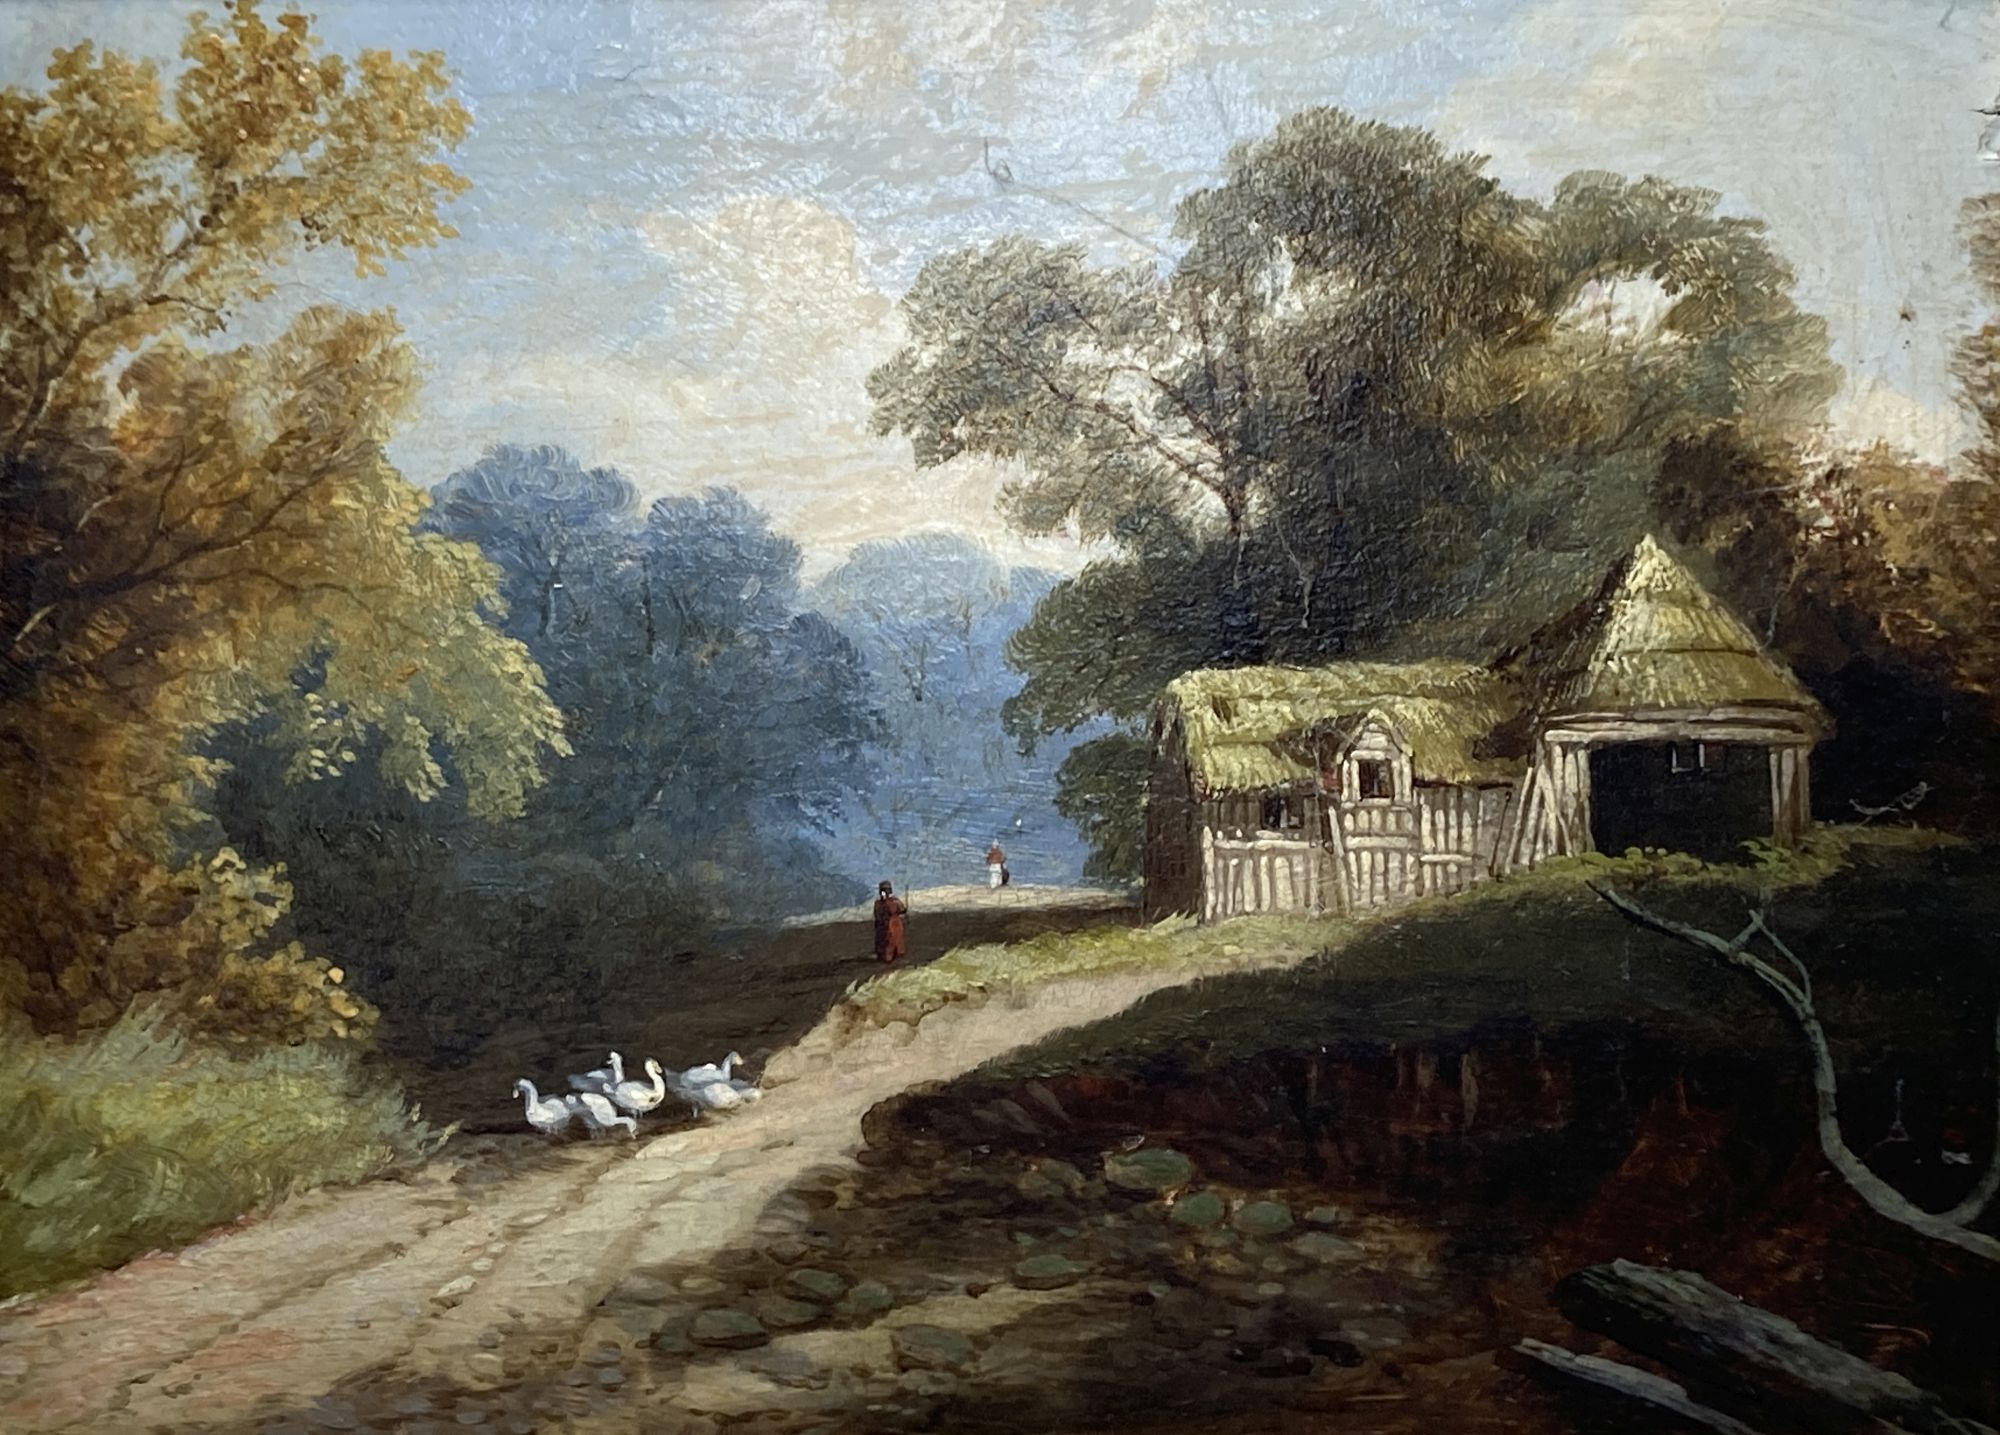 19th century English School, oil on mill board, Ducks on a lane with a thatched barn beyond, 22 x 30cm